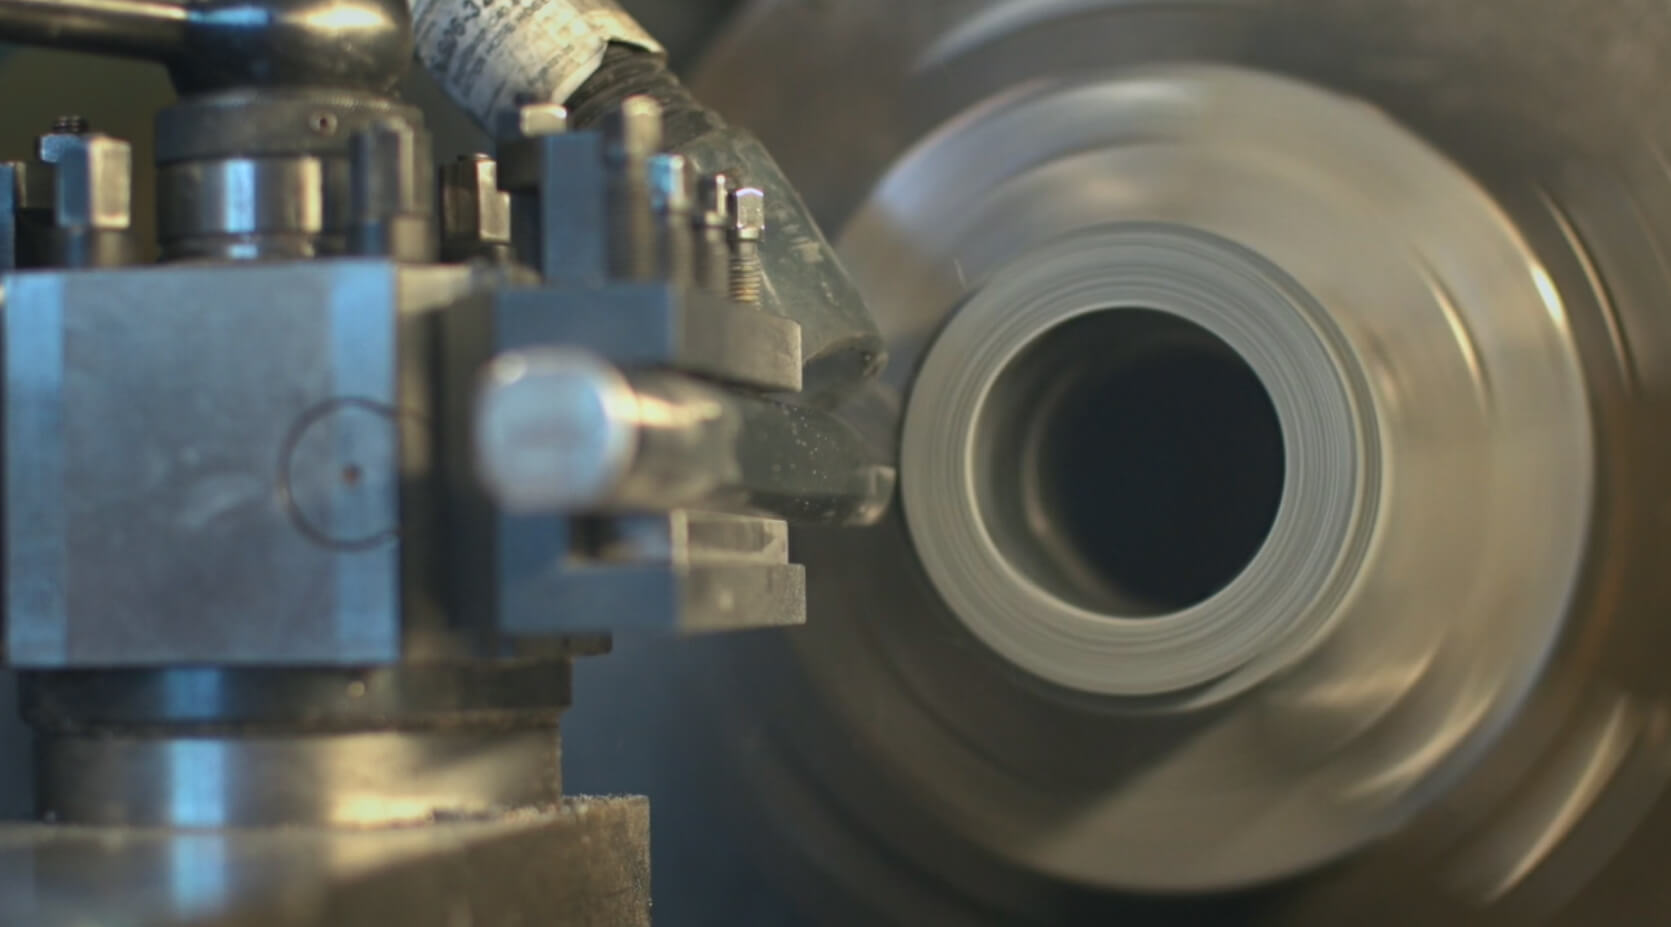 CNC machining-Contract Manufacturing Specialists of Ohio